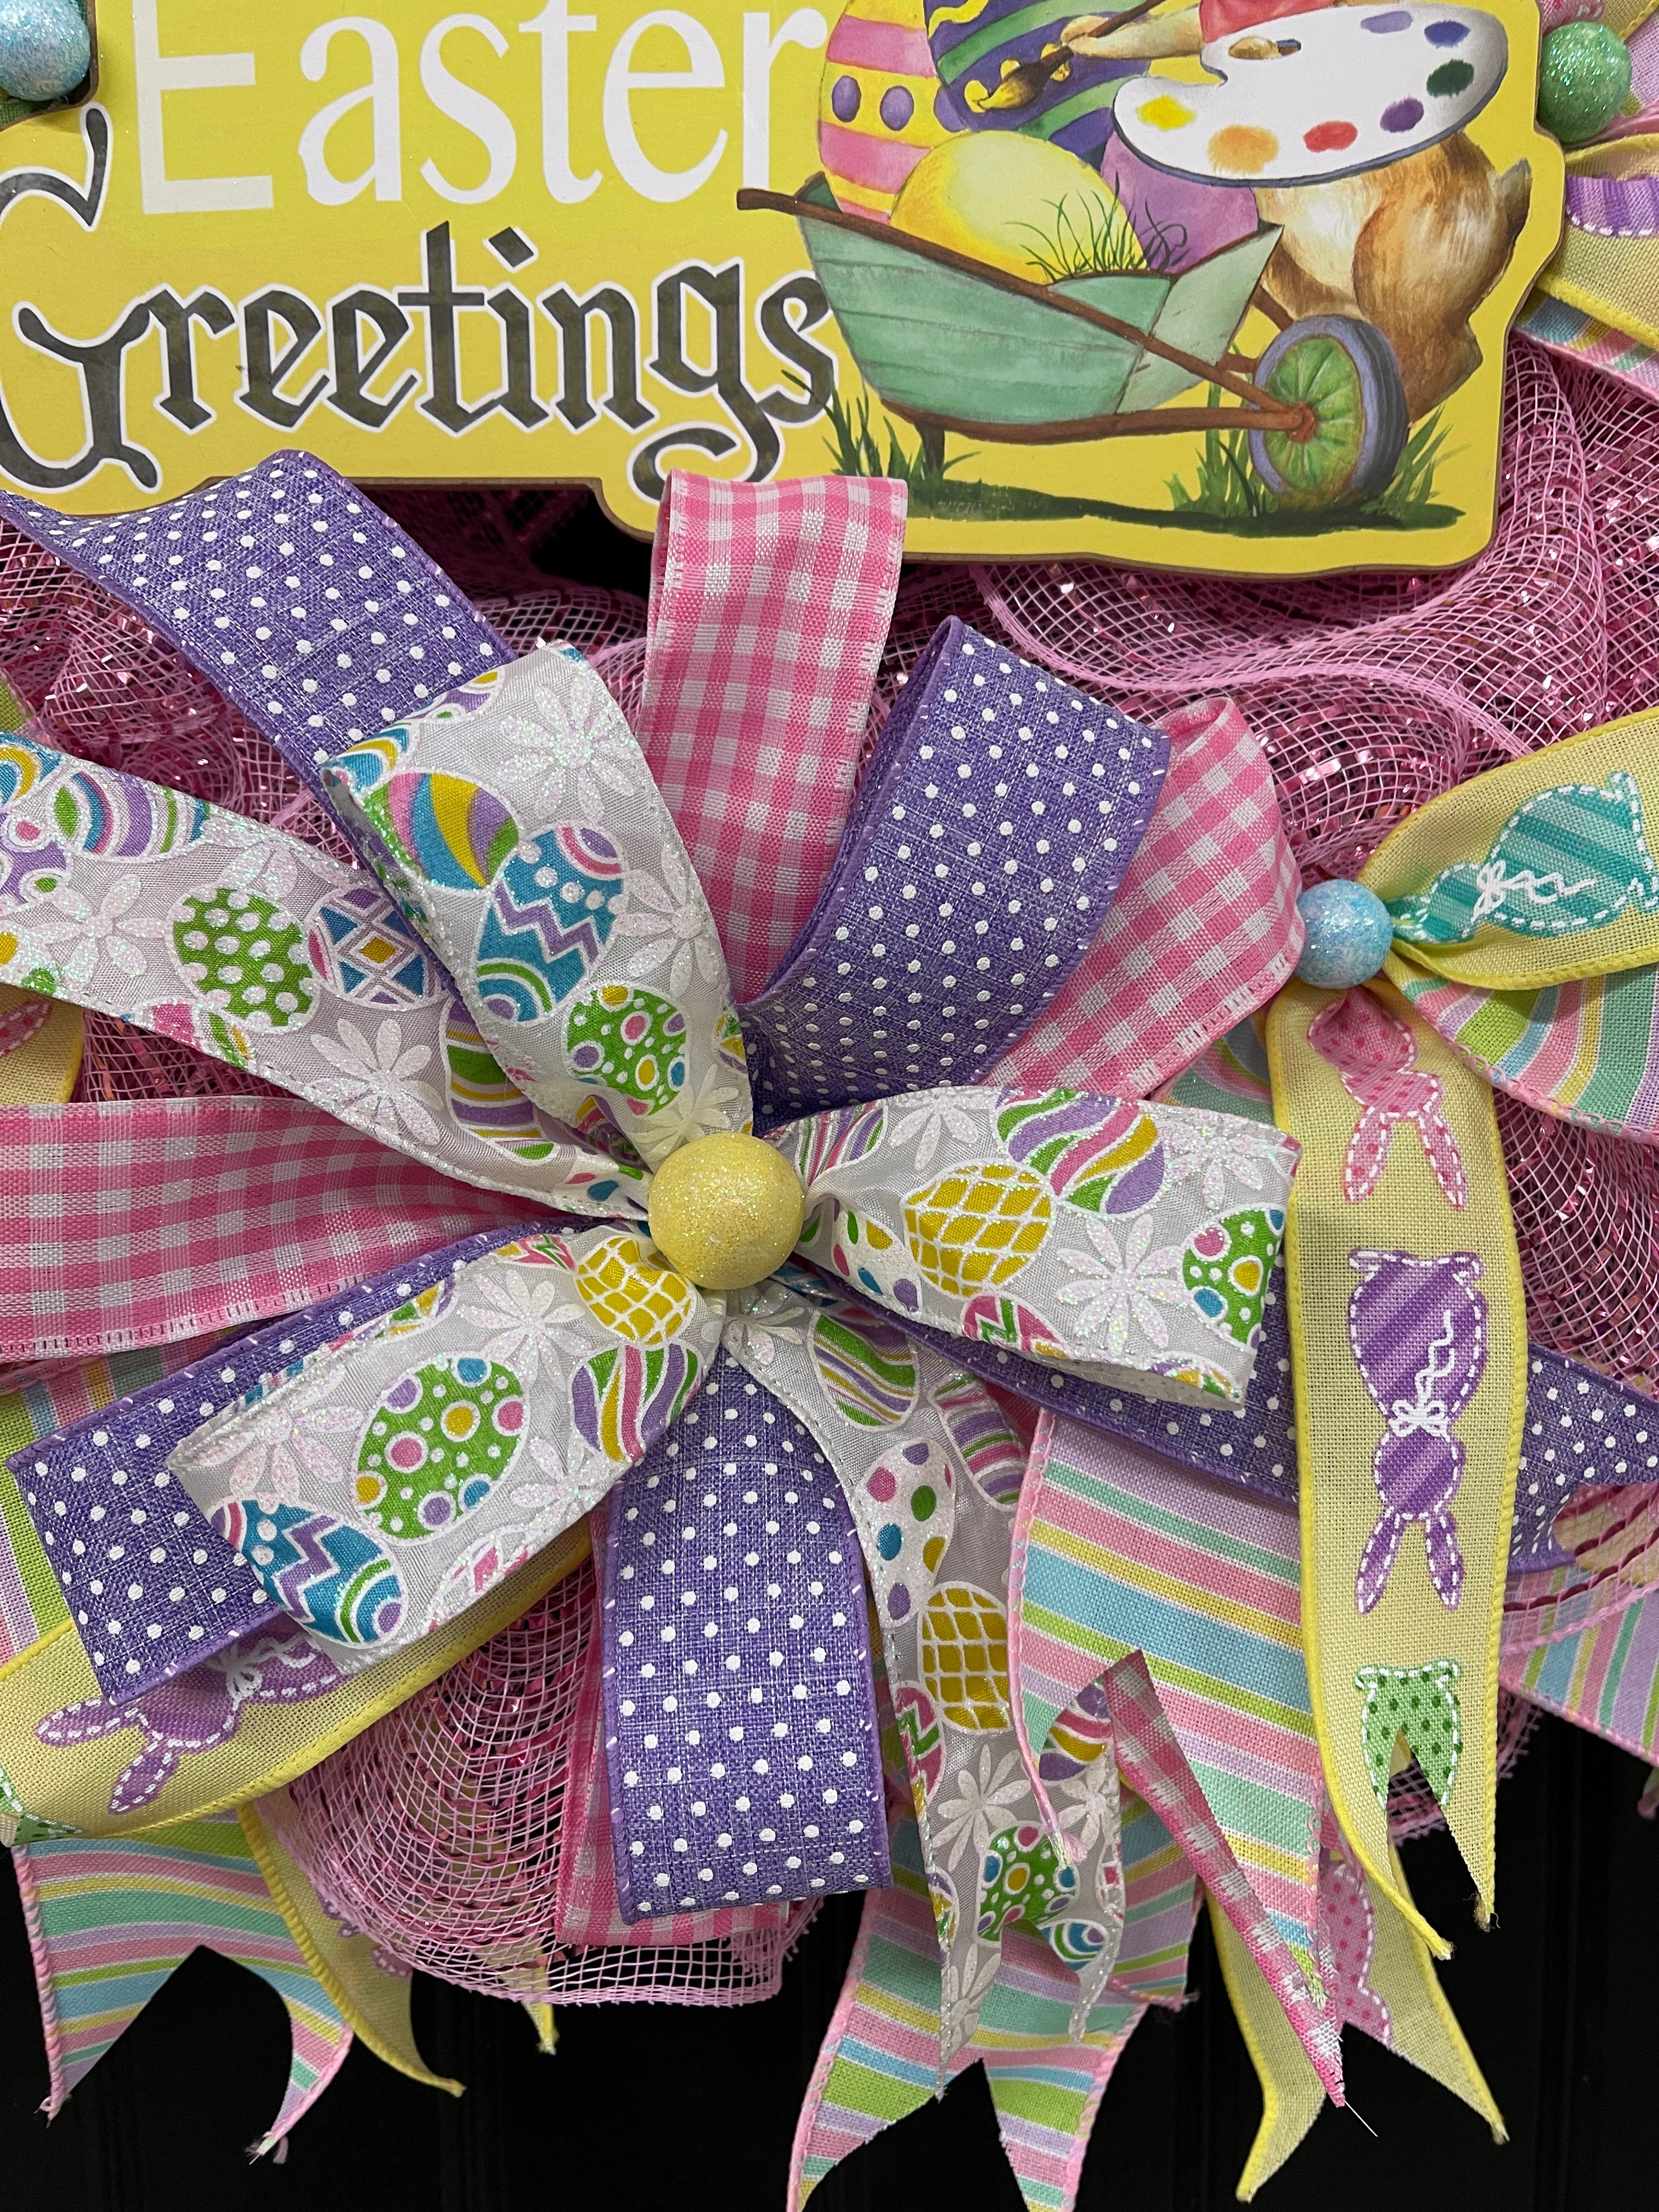 Close Up of Bow featuring Purple and White Polka Dot Ribbons, Pink and White Gingham Ribbons, Colored Pastel Eggs on White Ribbon and Pastel Bunnies on Yellow Ribbon